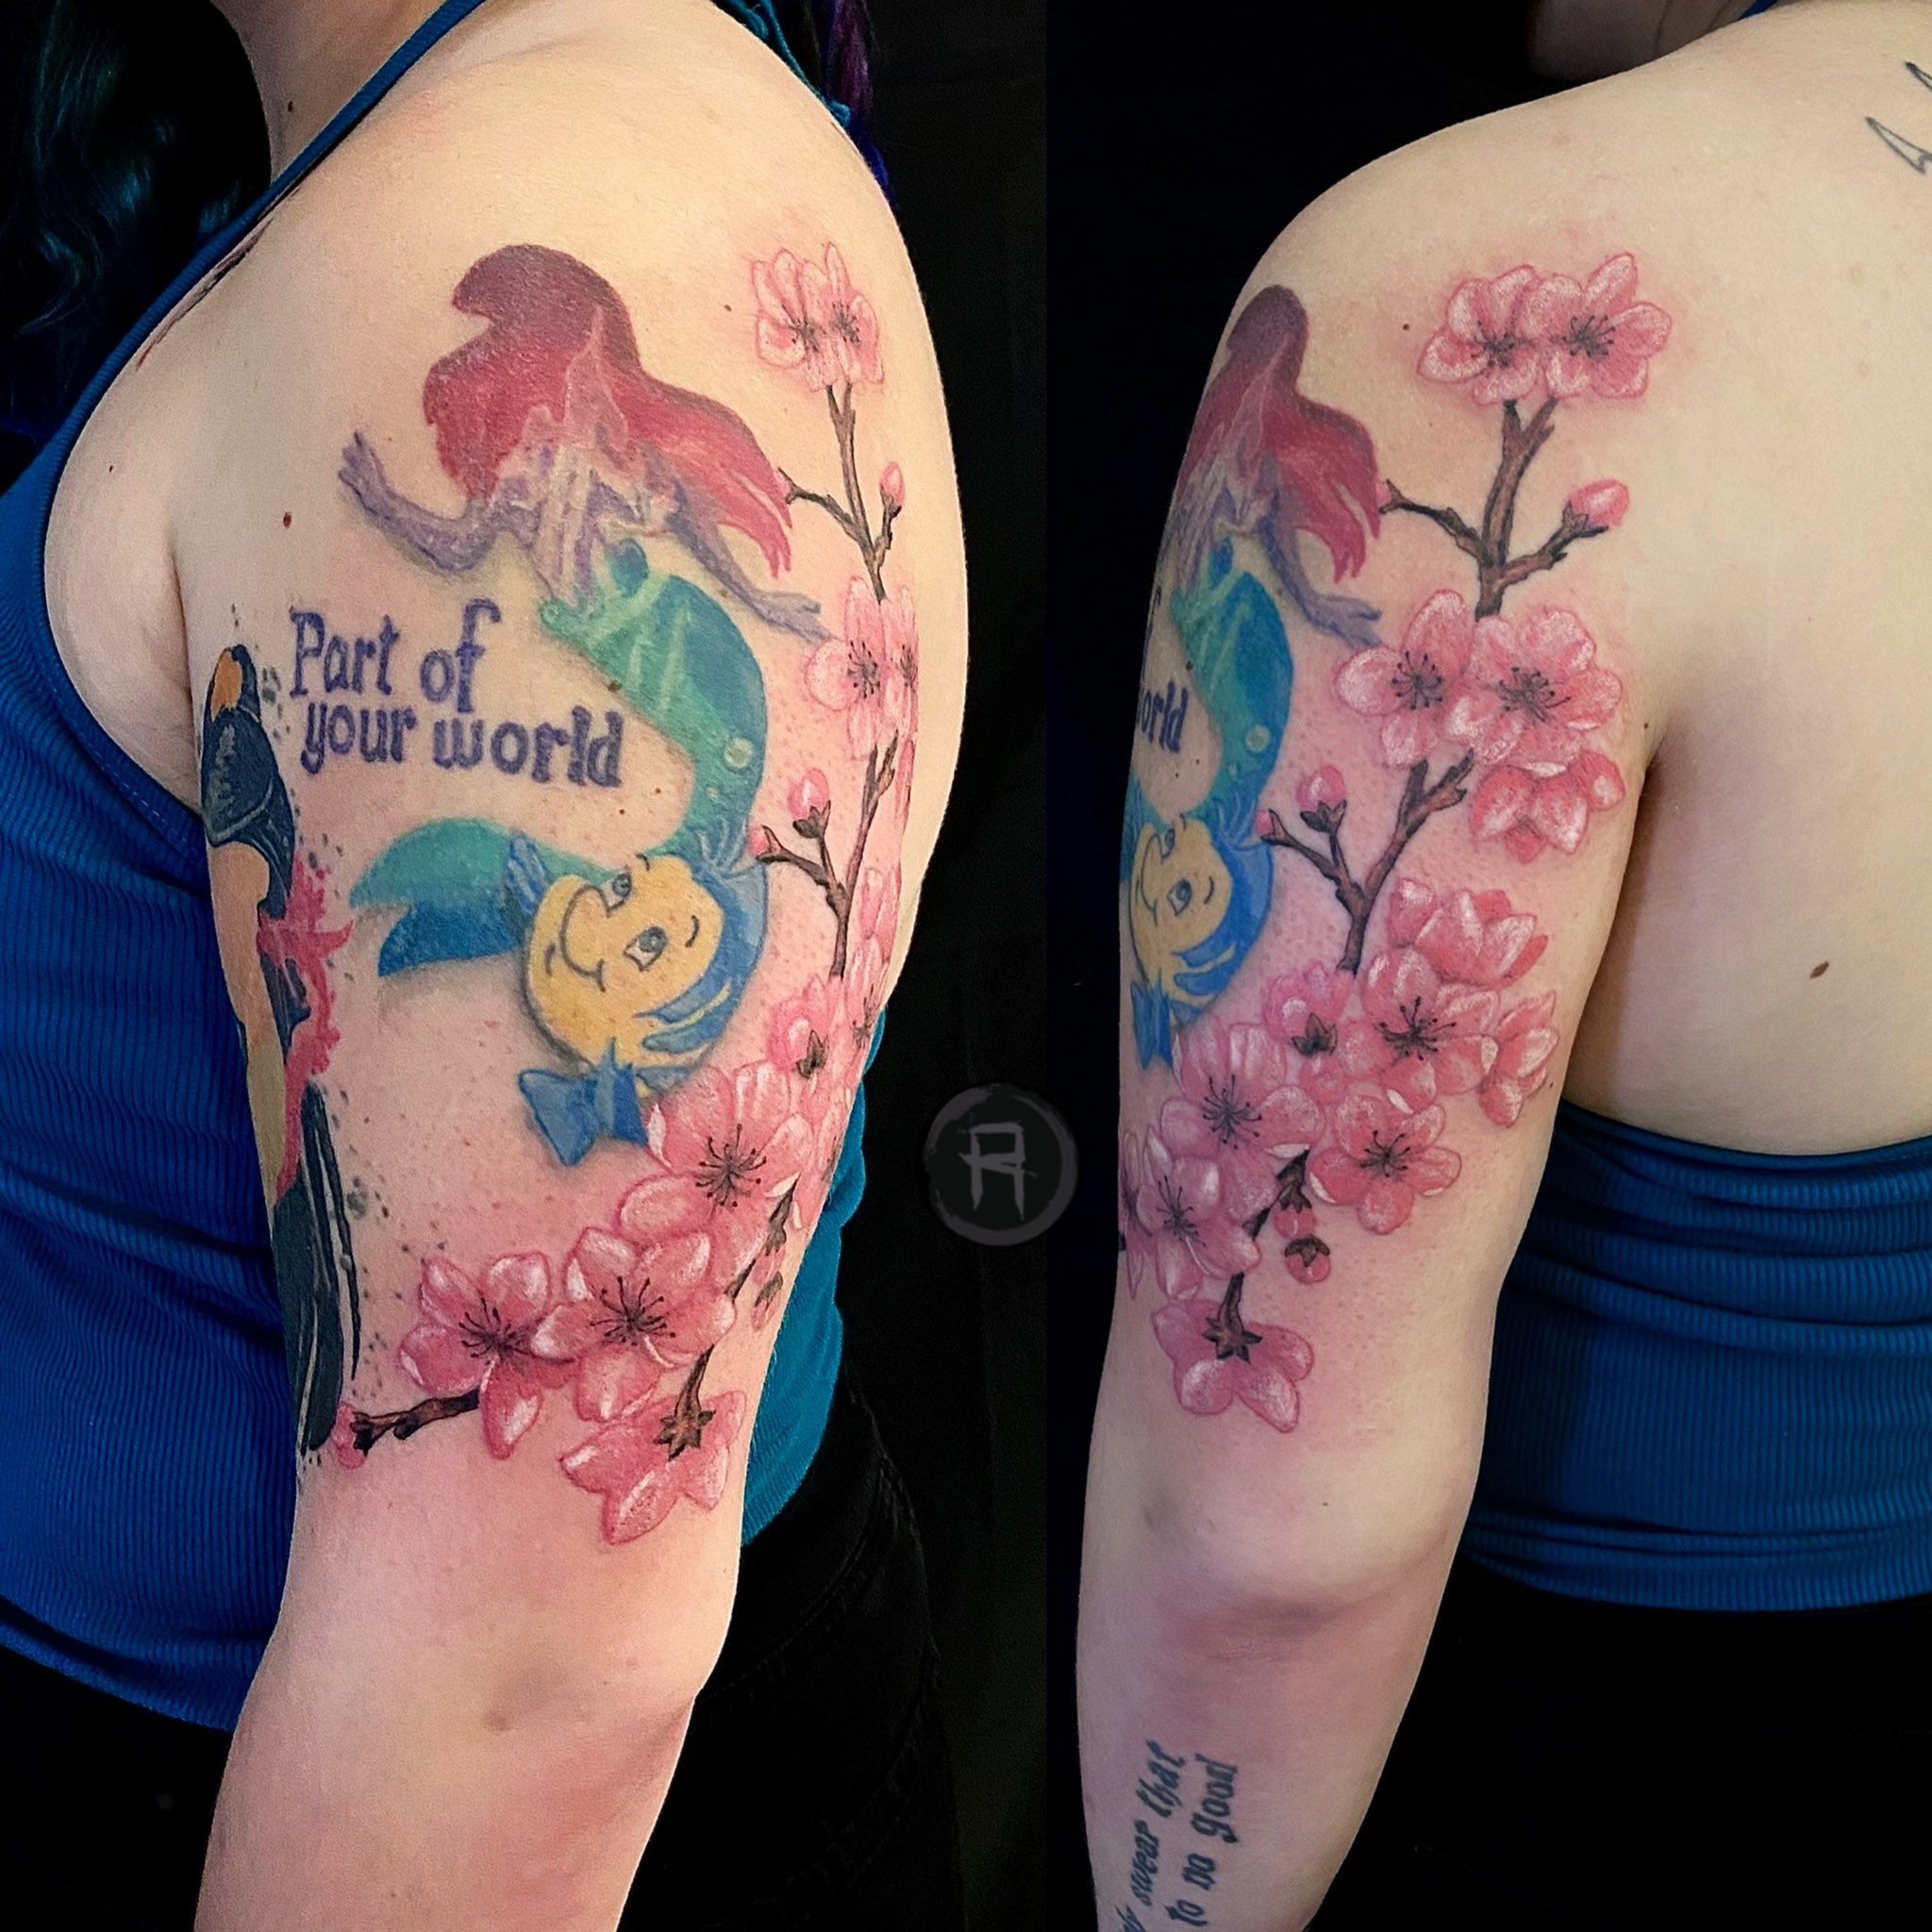 aitenitas on Twitter What a miracle  Unimaginable palette and Disney  heroes gathered on one sleeve tattoostyle armtattoo sleevetattoo  httpstcoHl4xIAbBh9  Twitter